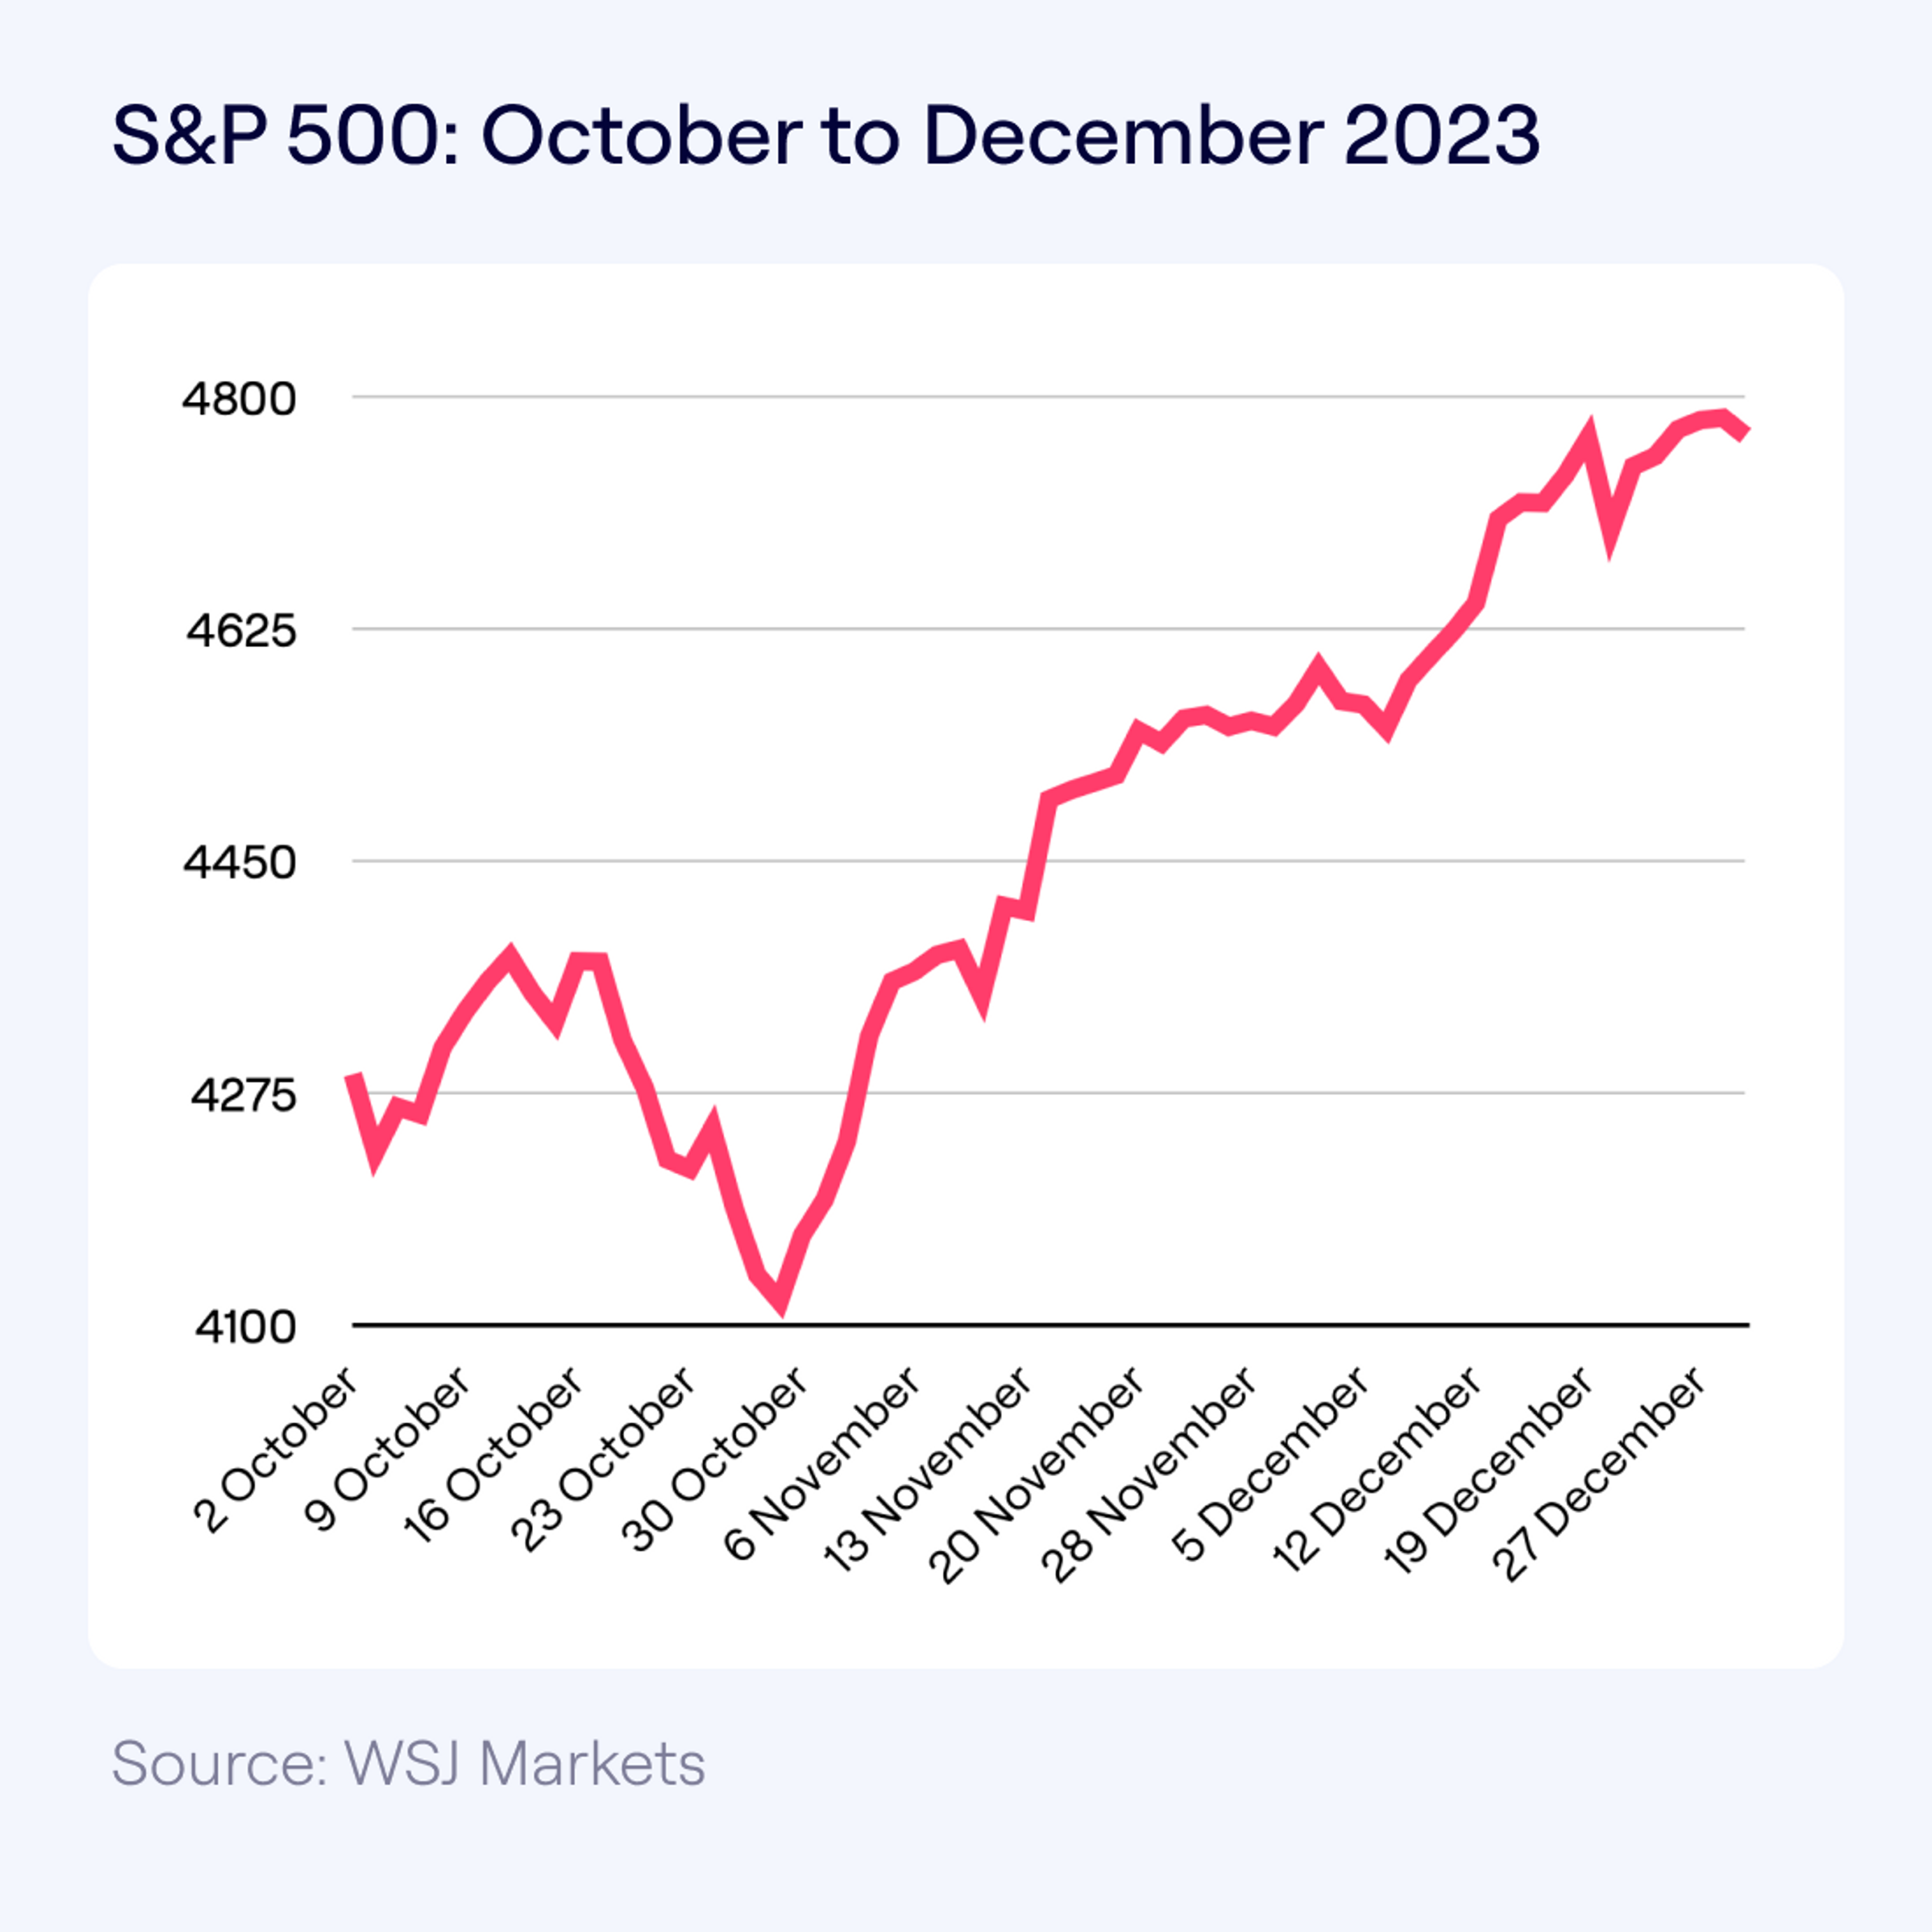 Line graph displaying the S&P 500 index from October to December 2023, showing an overall upward trend with some fluctuations. End of October marks the lowest point, with a steady rise towards December.